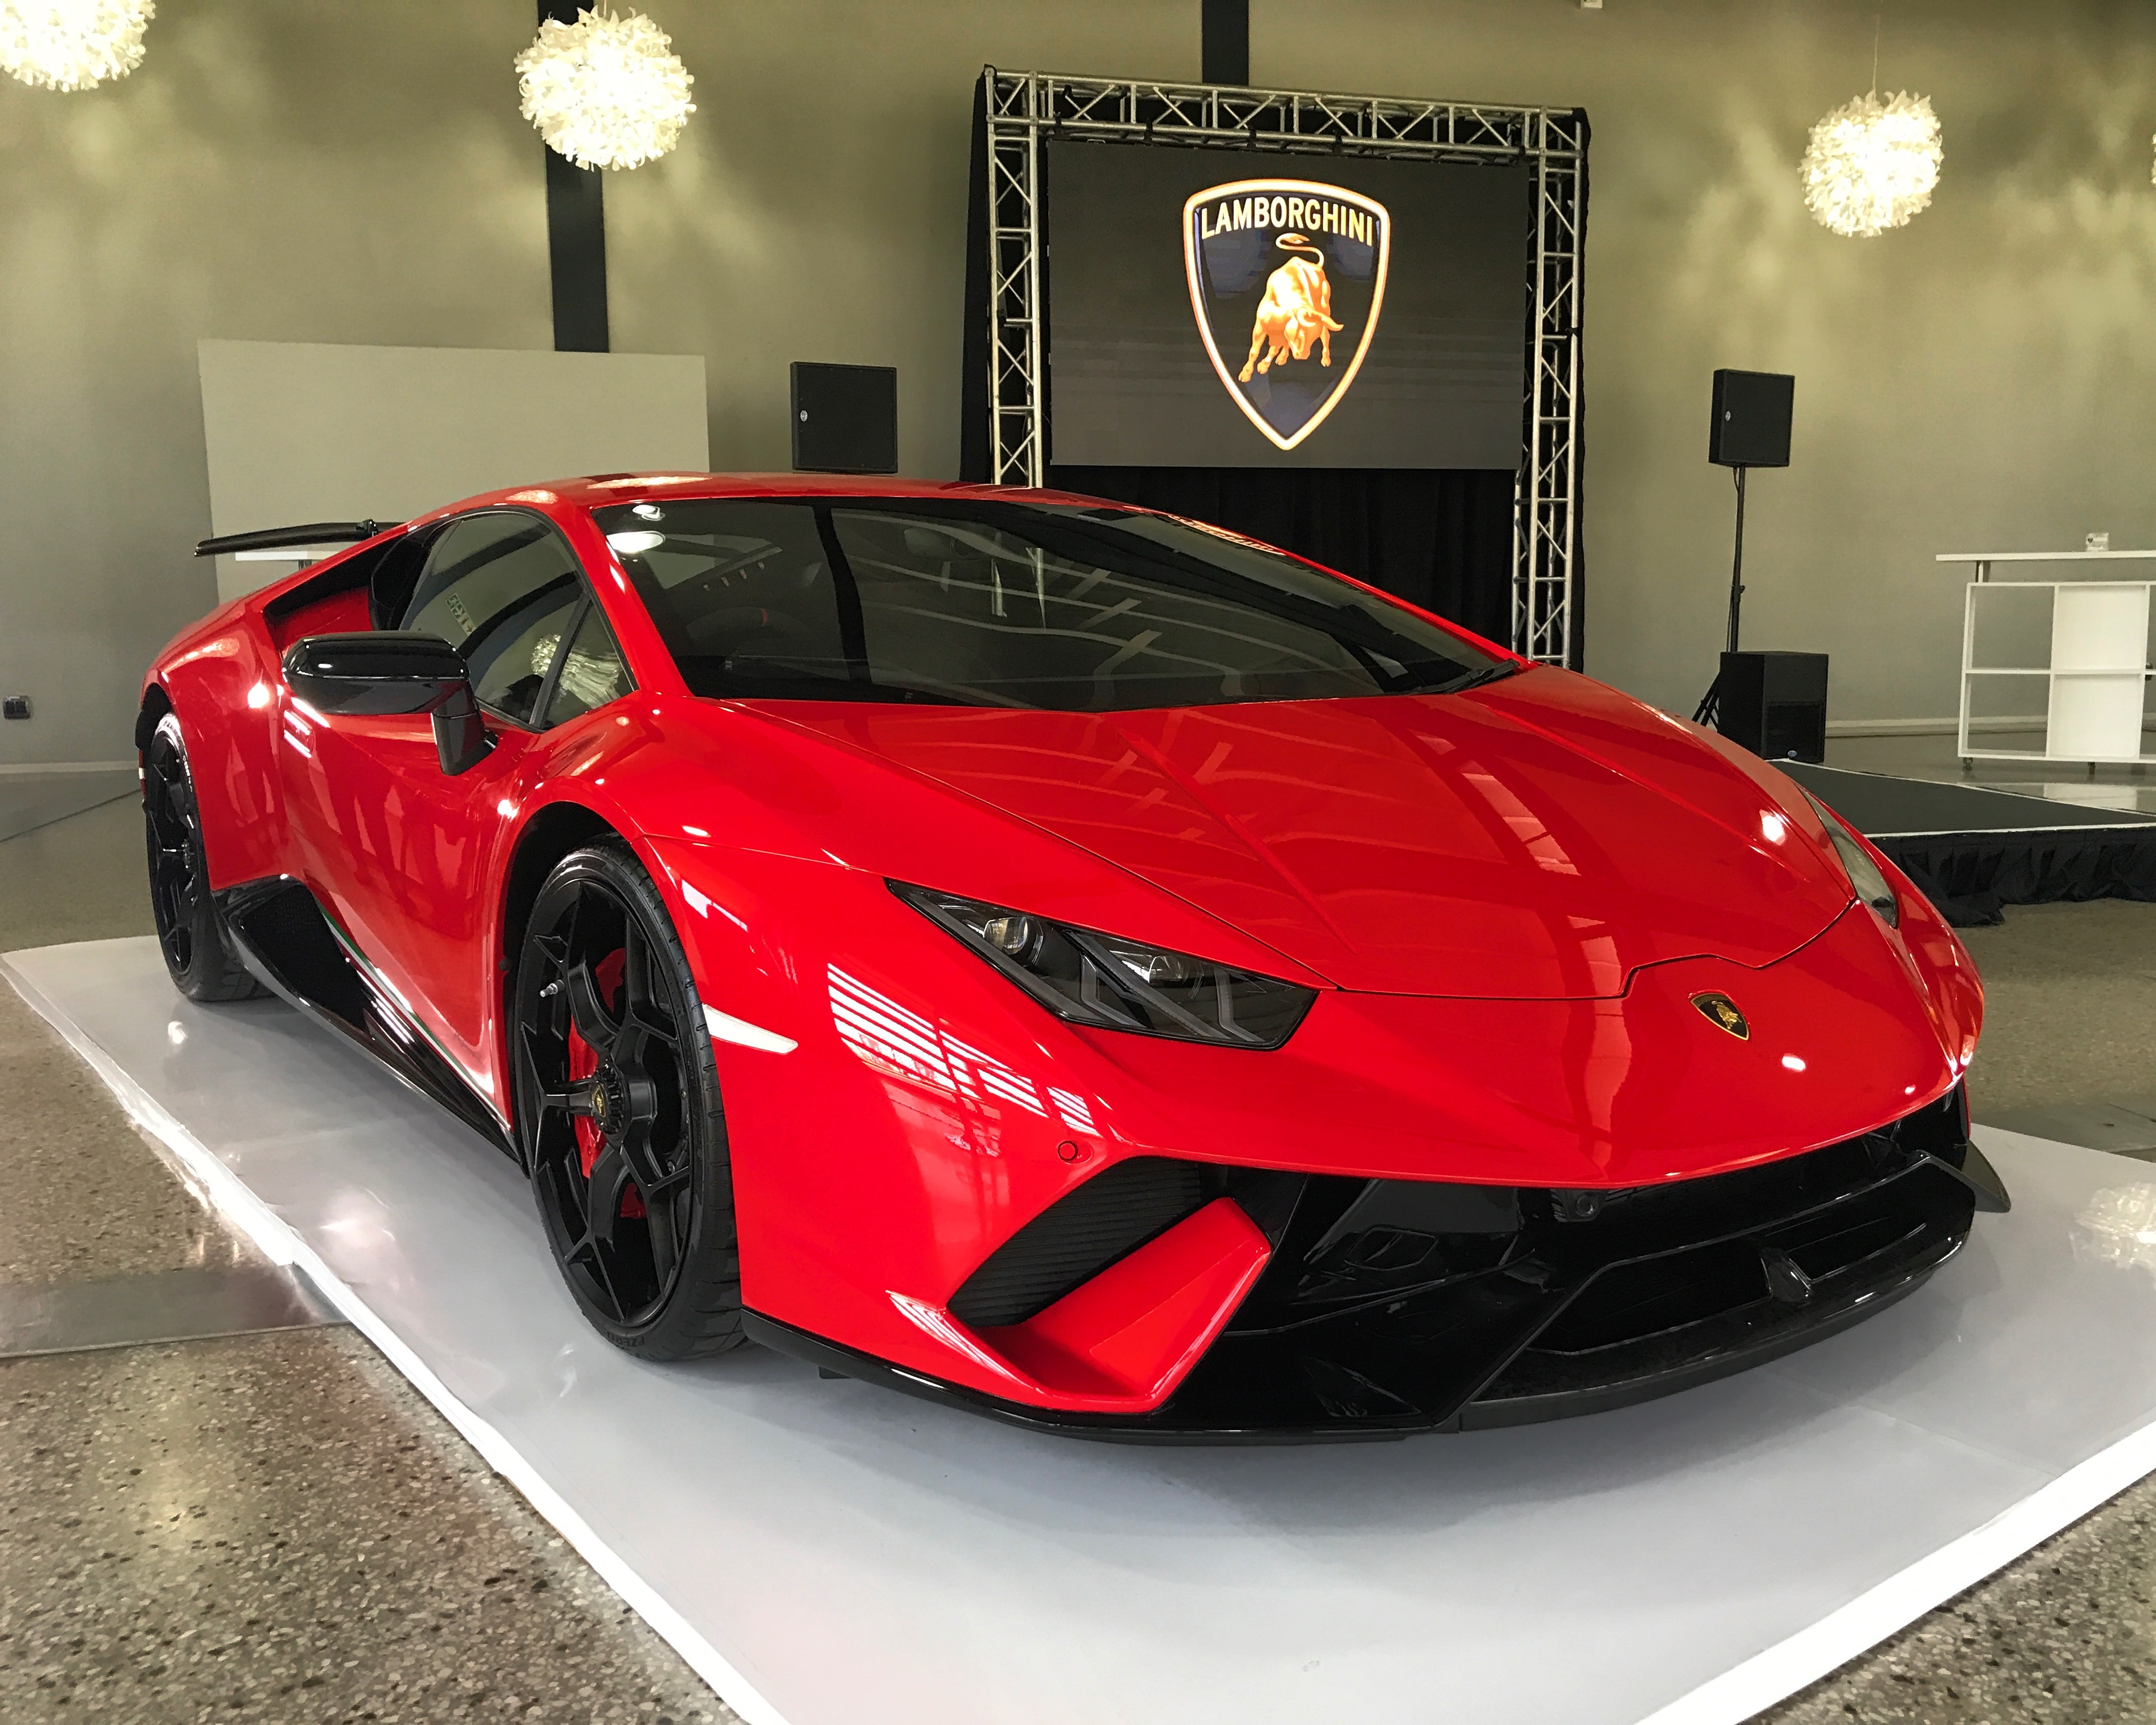 Lamborghini Huracán Performante Shows Angry Face In Africa